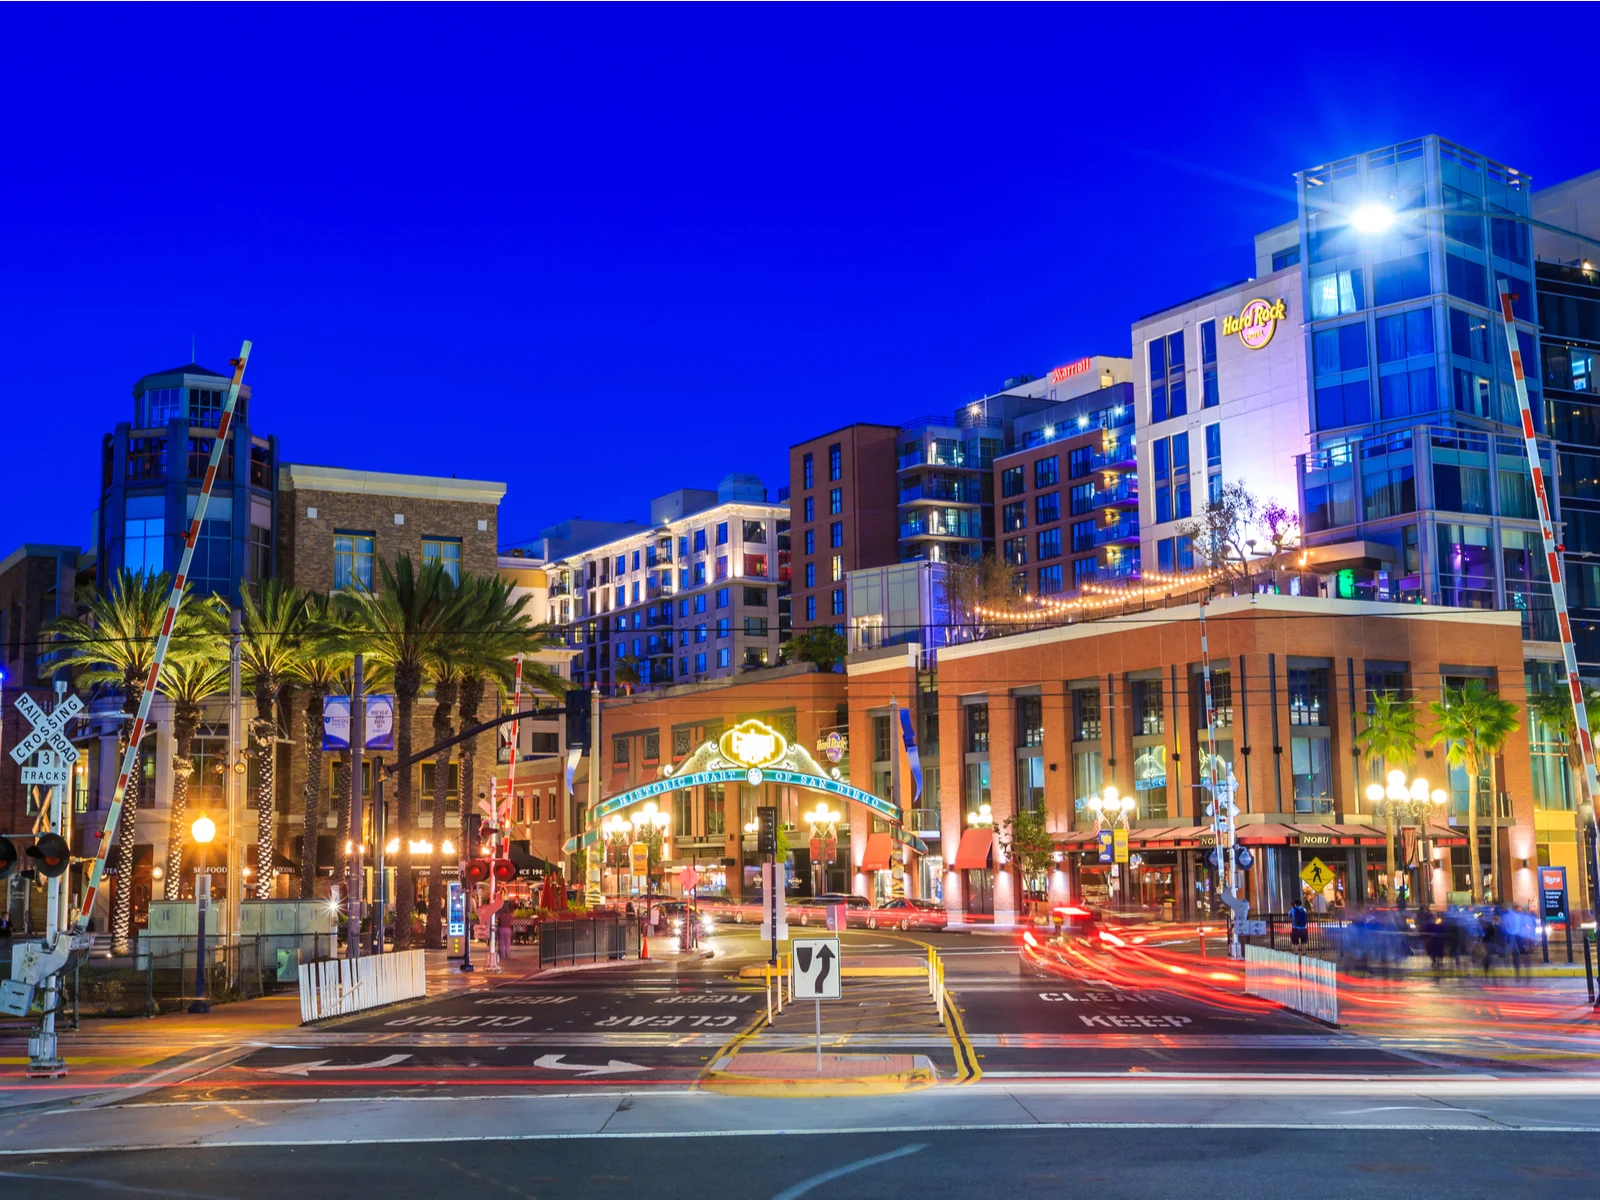 Gaslamp Quarter, one of the best places to stay in San Diego, pictured at night